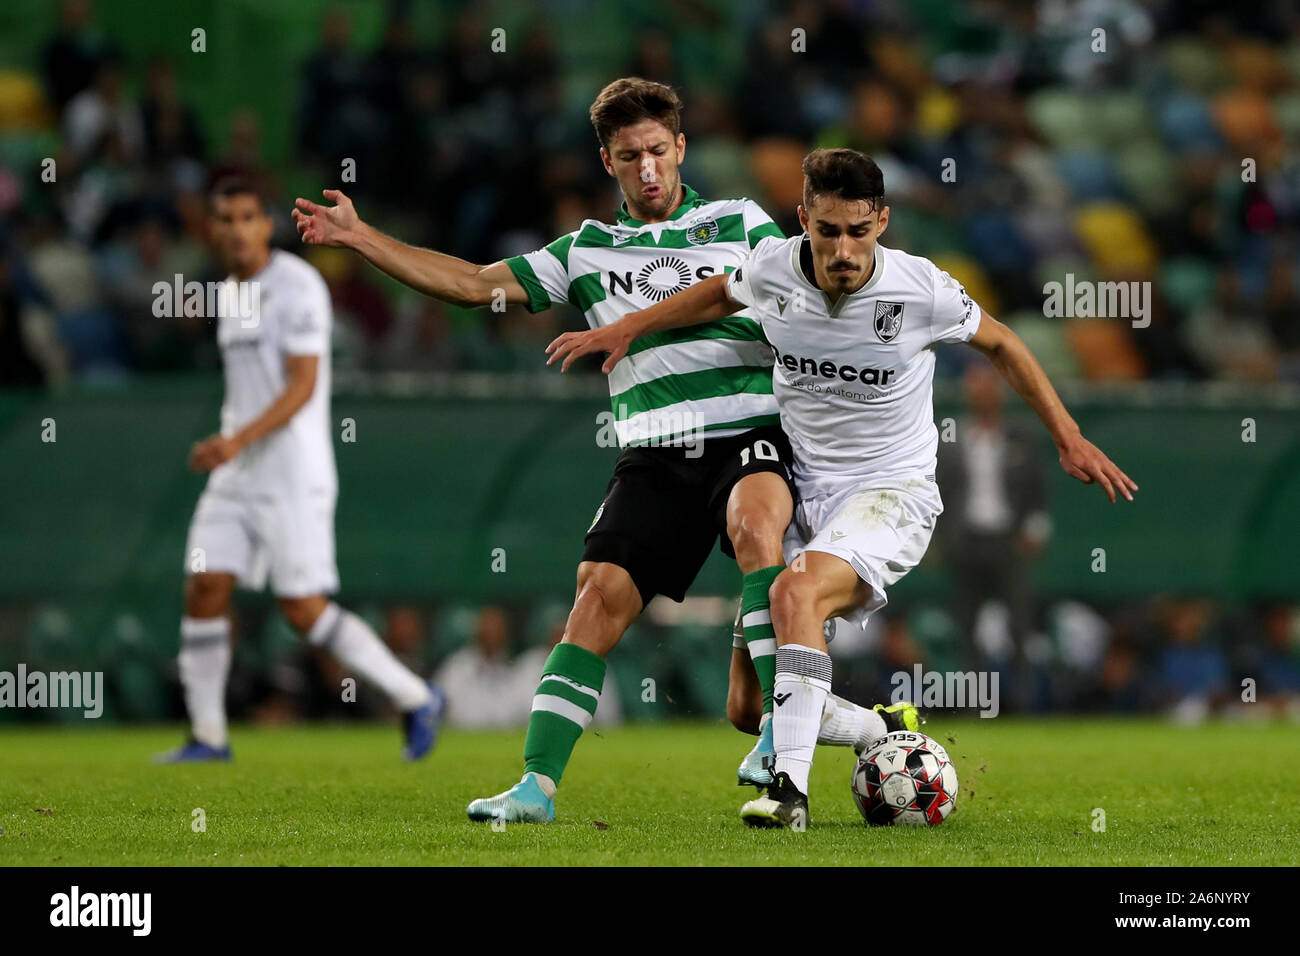 Lisbon, Portugal. 27th Oct, 2019. Andre Almeida (R) of Vitoria Guimaraes vies with Luciano Vietto of Sporting CP during the Portuguese League football match in Lisbon, Portugal, Oct. 27, 2019. Credit: Pedro Fiuza/Xinhua/Alamy Live News Stock Photo